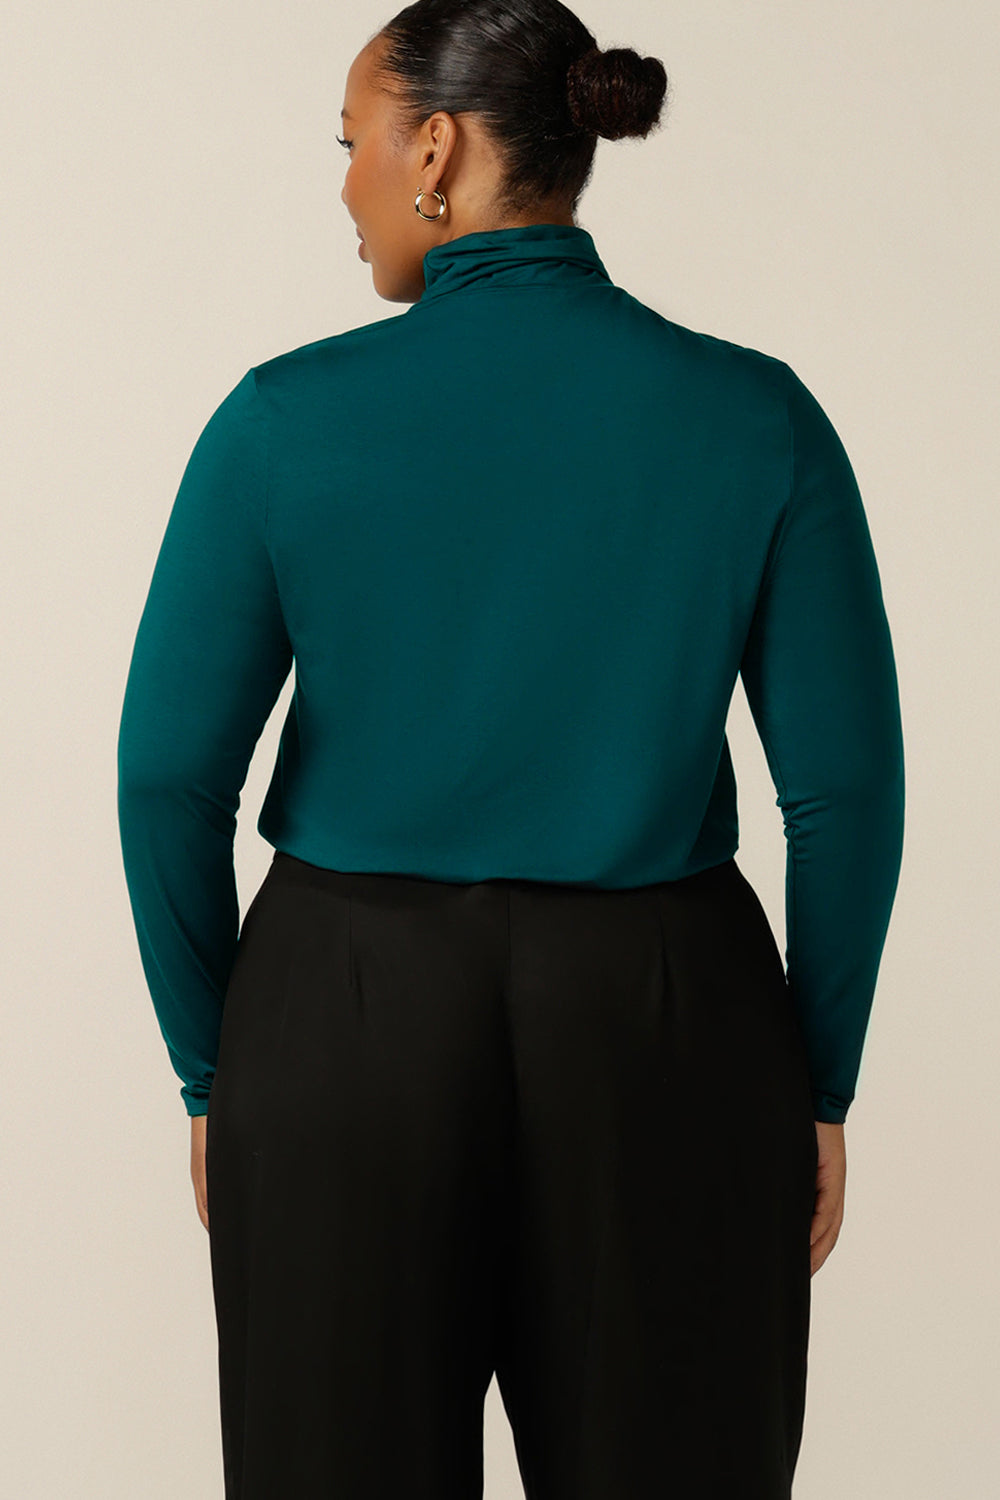 Back view of an Australian-made, women's long-sleeve, turtle neck top in petrol green bamboo jersey. Worn by a size 18, plus size woman, this polo neck top is available in an inclusive 8-24 size range. 